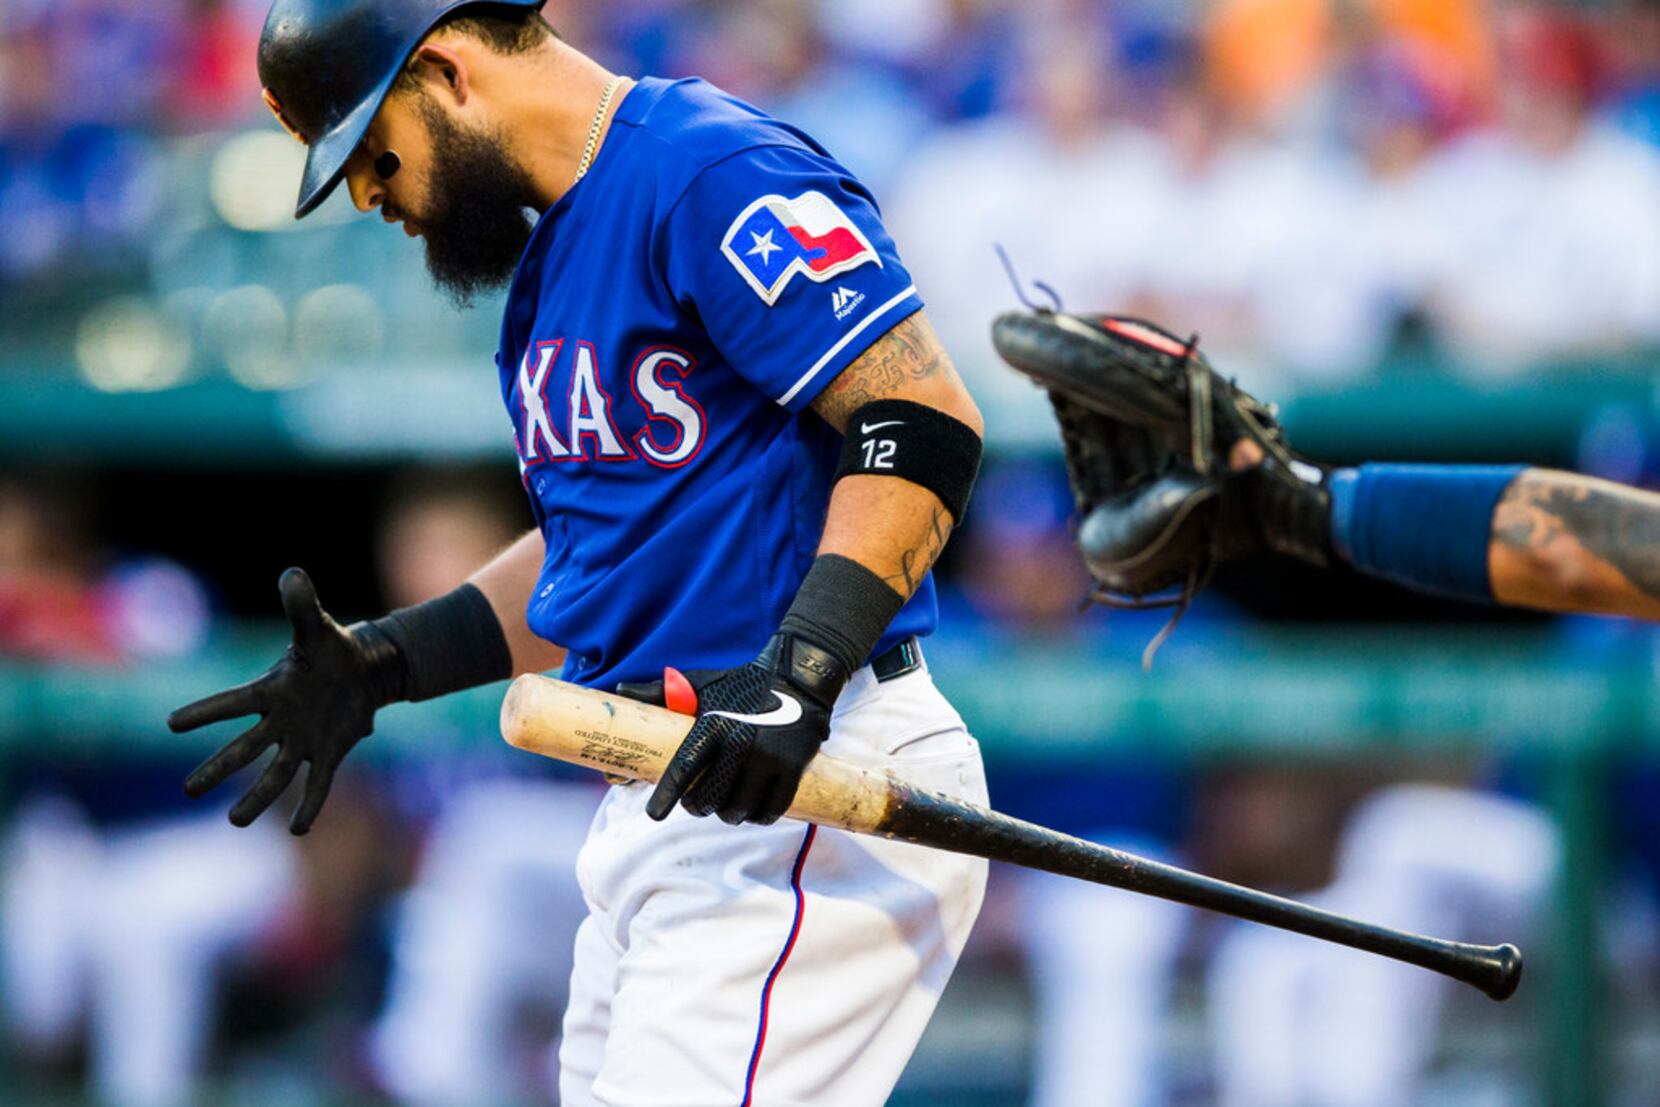 No Odor on Rangers in '21; team moving on from longtime 2B